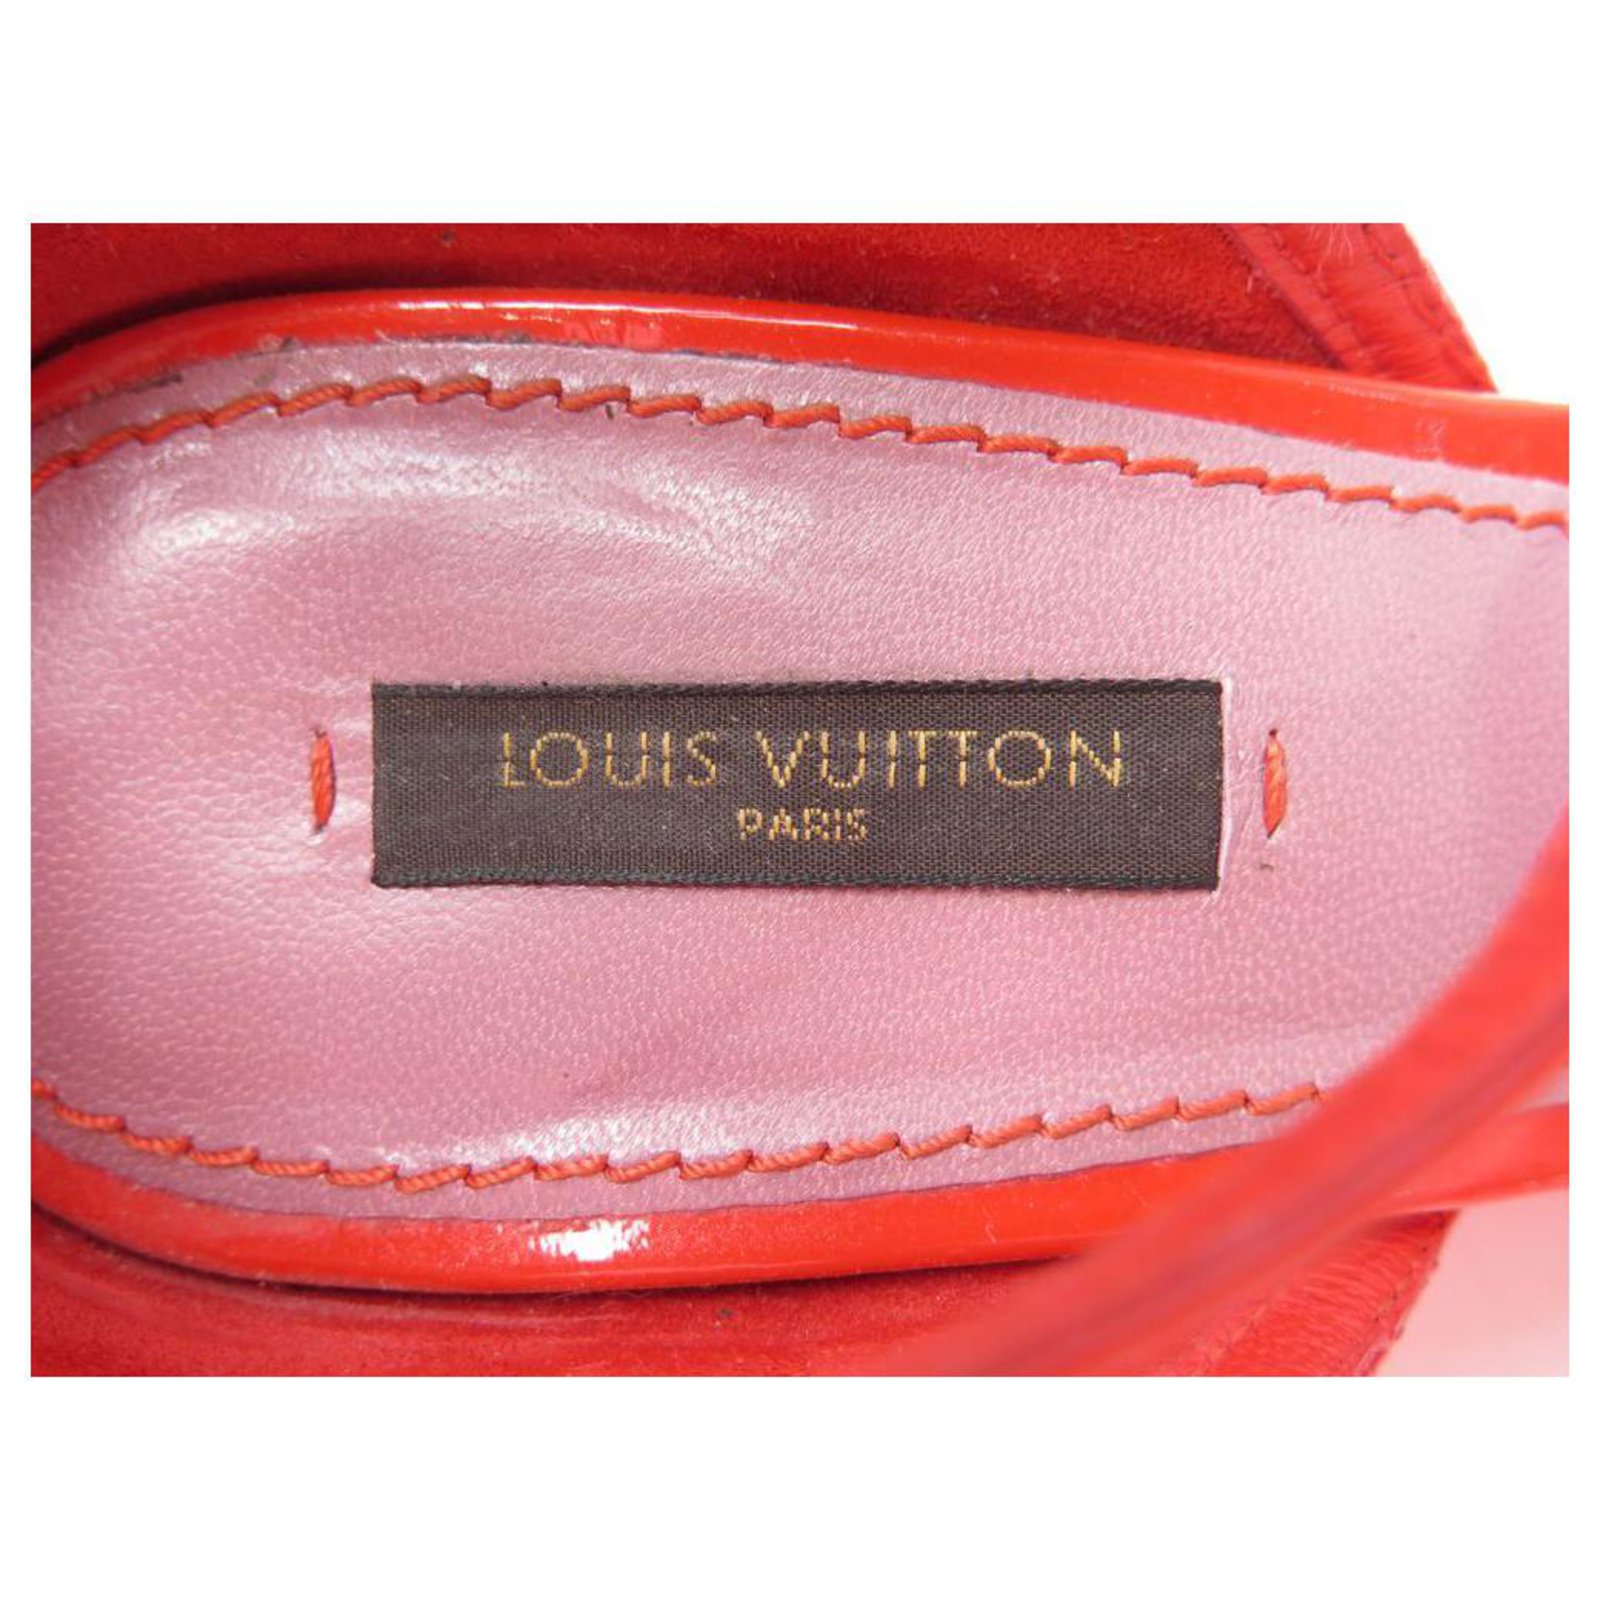 LOUIS VUITTON STRAWBERRY WEDGE SANDALS HEELS 39.5 LEATHER + BOX Red Patent  leather ref.329363 - Joli Closet